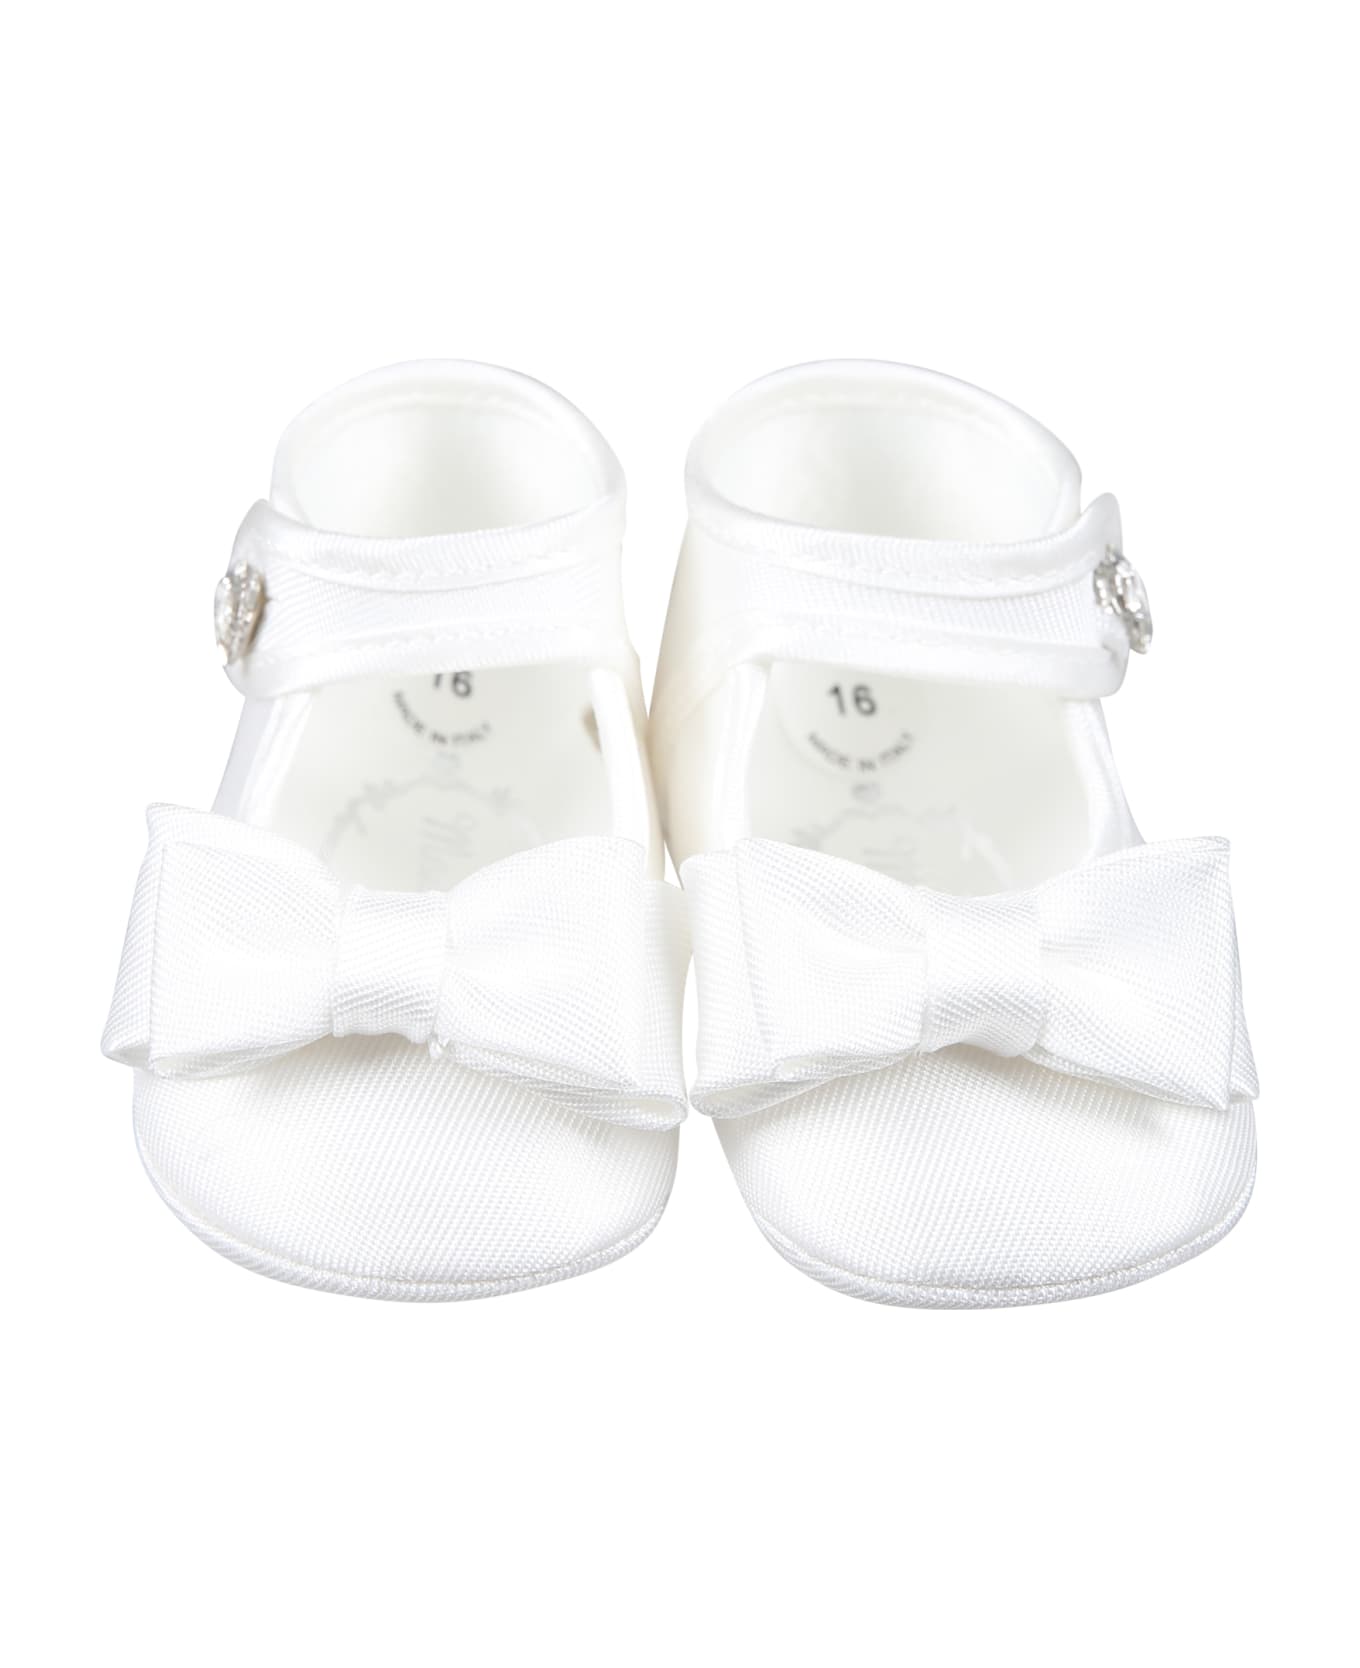 Monnalisa White Flat Shoes For Baby Girl With Bow - White